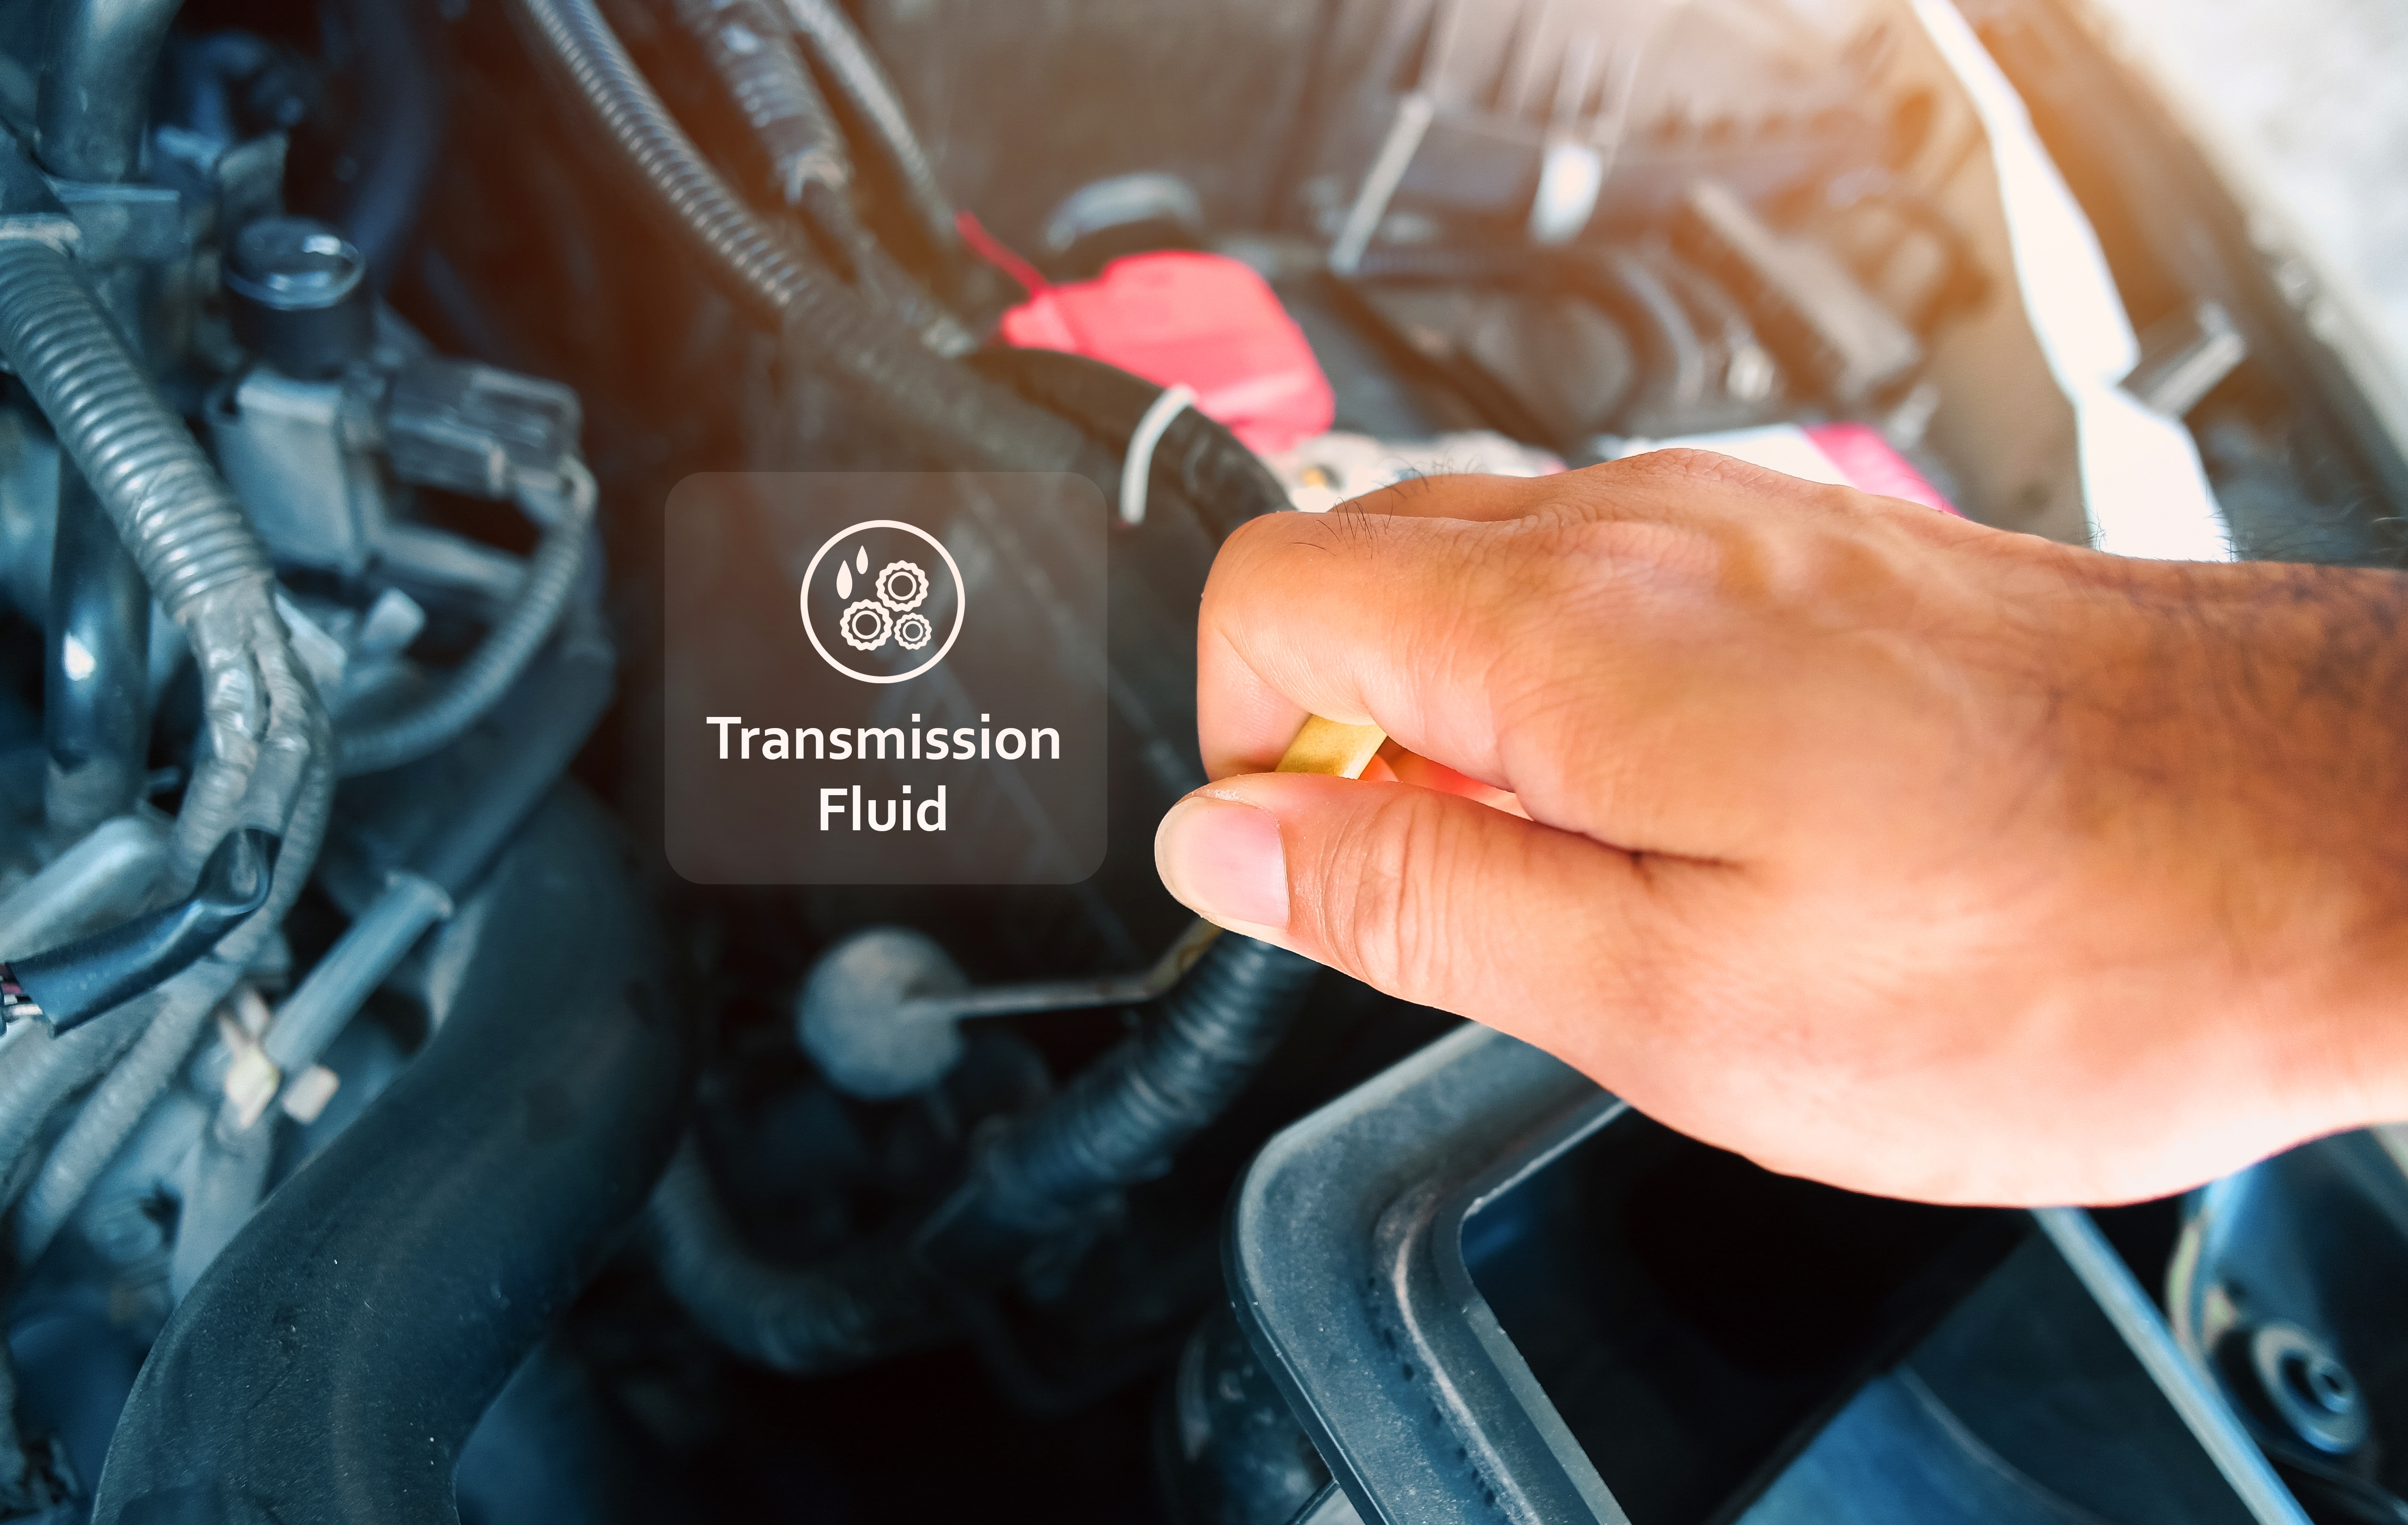 When Should I Change the Transmission Fluid in my Car?